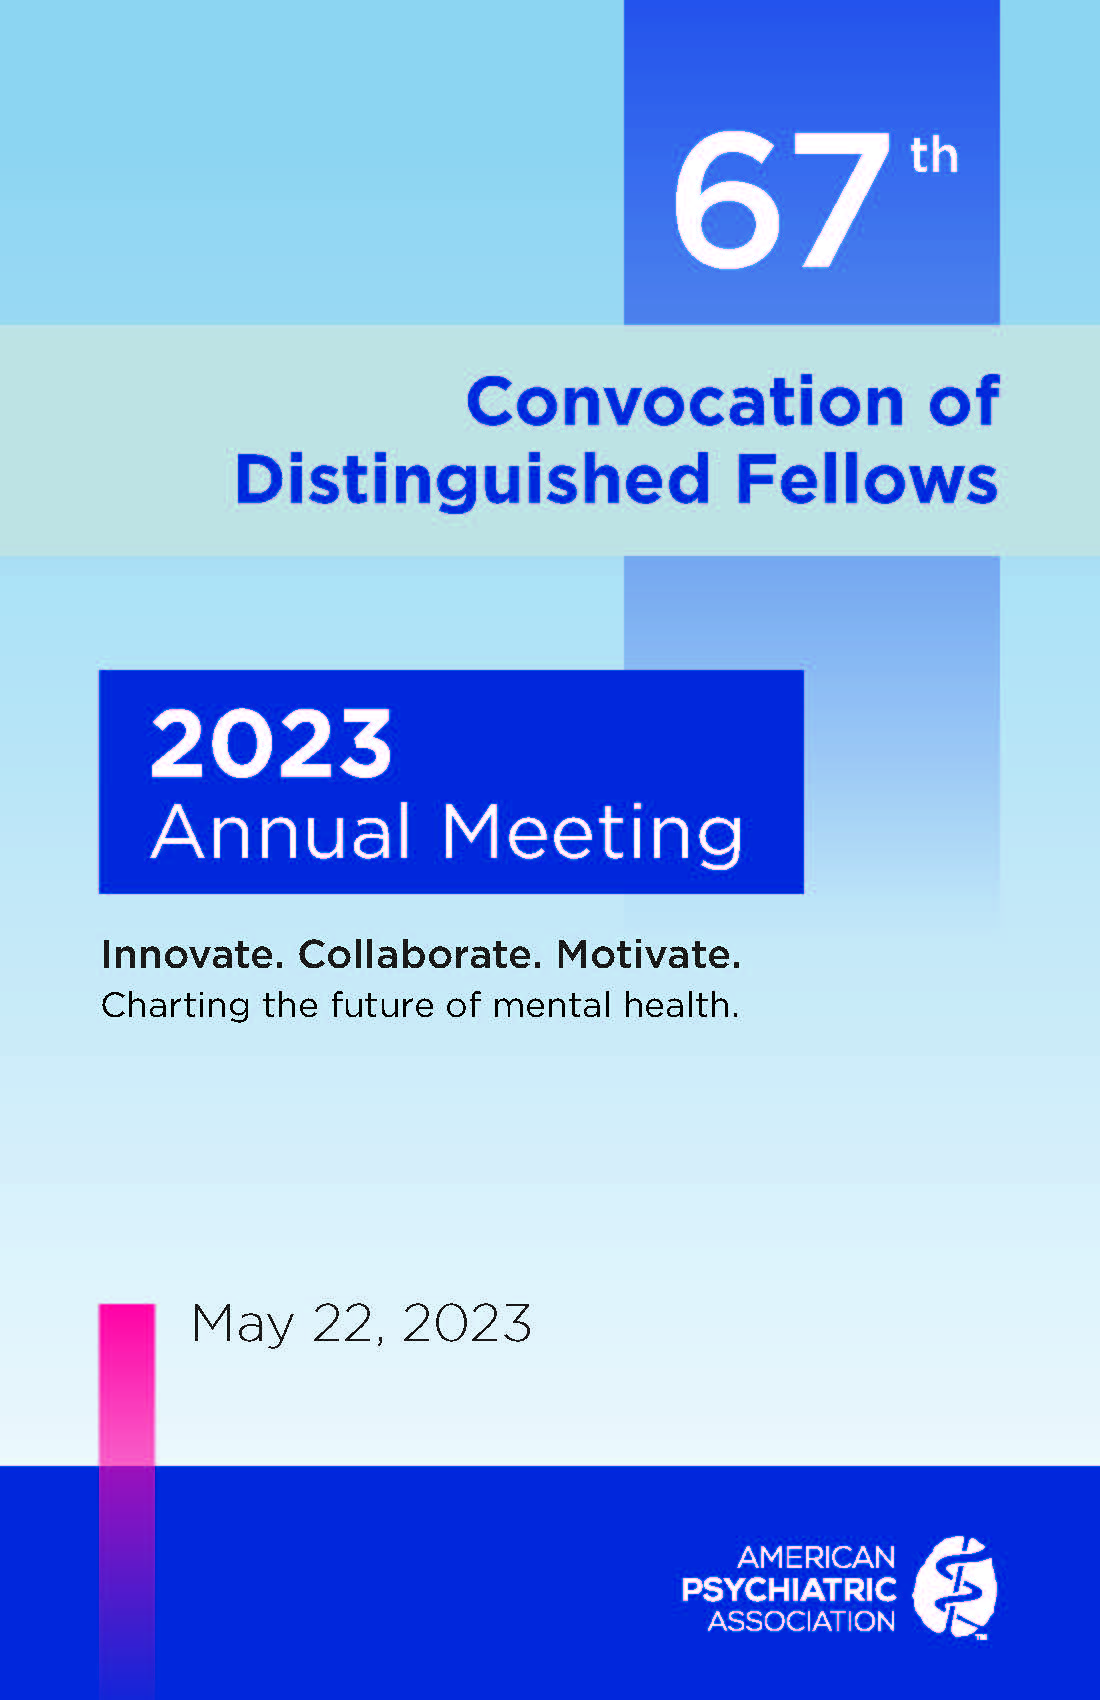 67th Convocation of Distinguished Fellows; 2023 Annual Meeting; Innovate. Collaborate. Motivate. Charting the future for mental health.; May 22, 2023; American Psychiatric Association